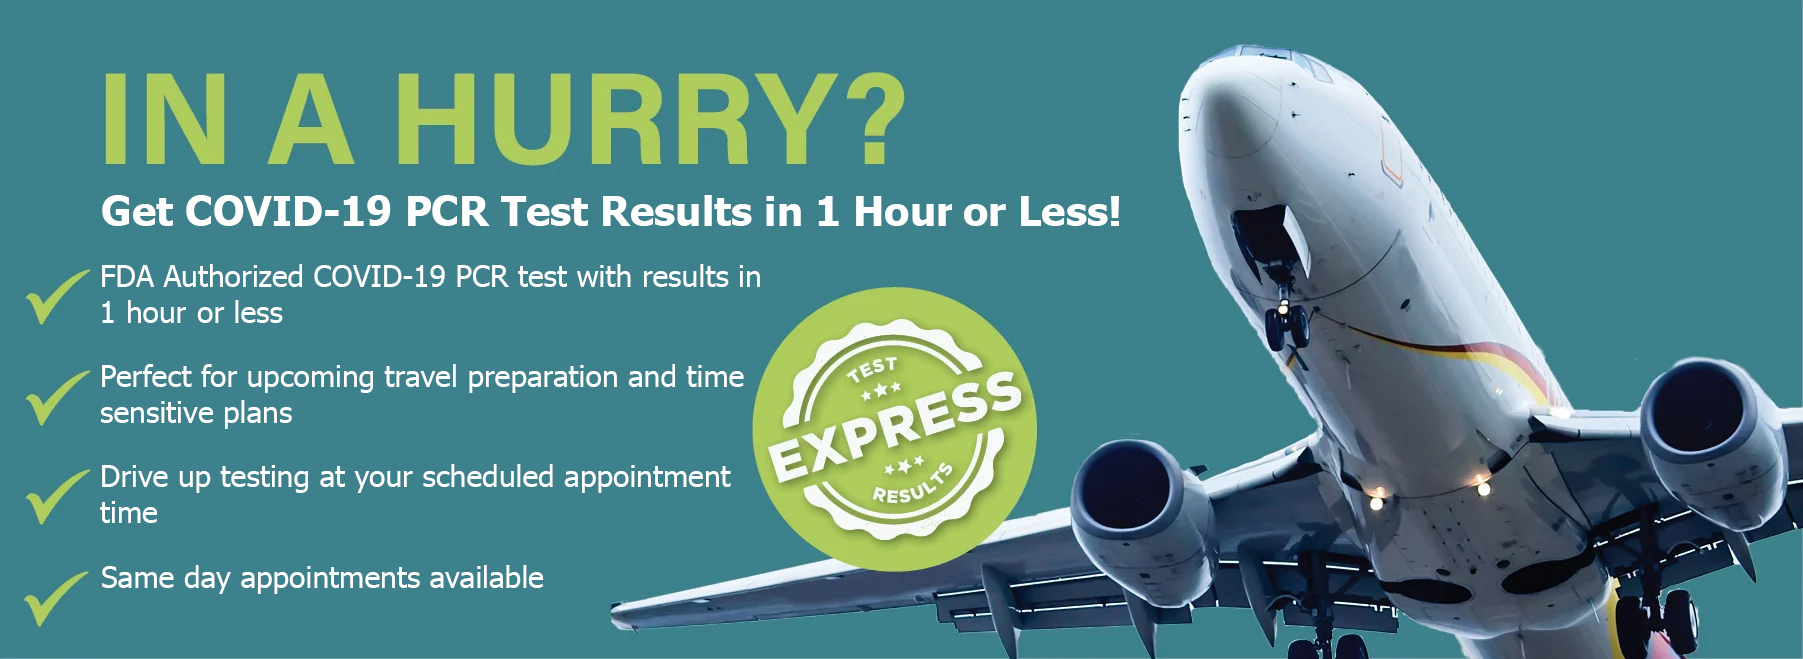 Express - Same Day Covid-19 PCR Testing - Get Results in 1 hour or less